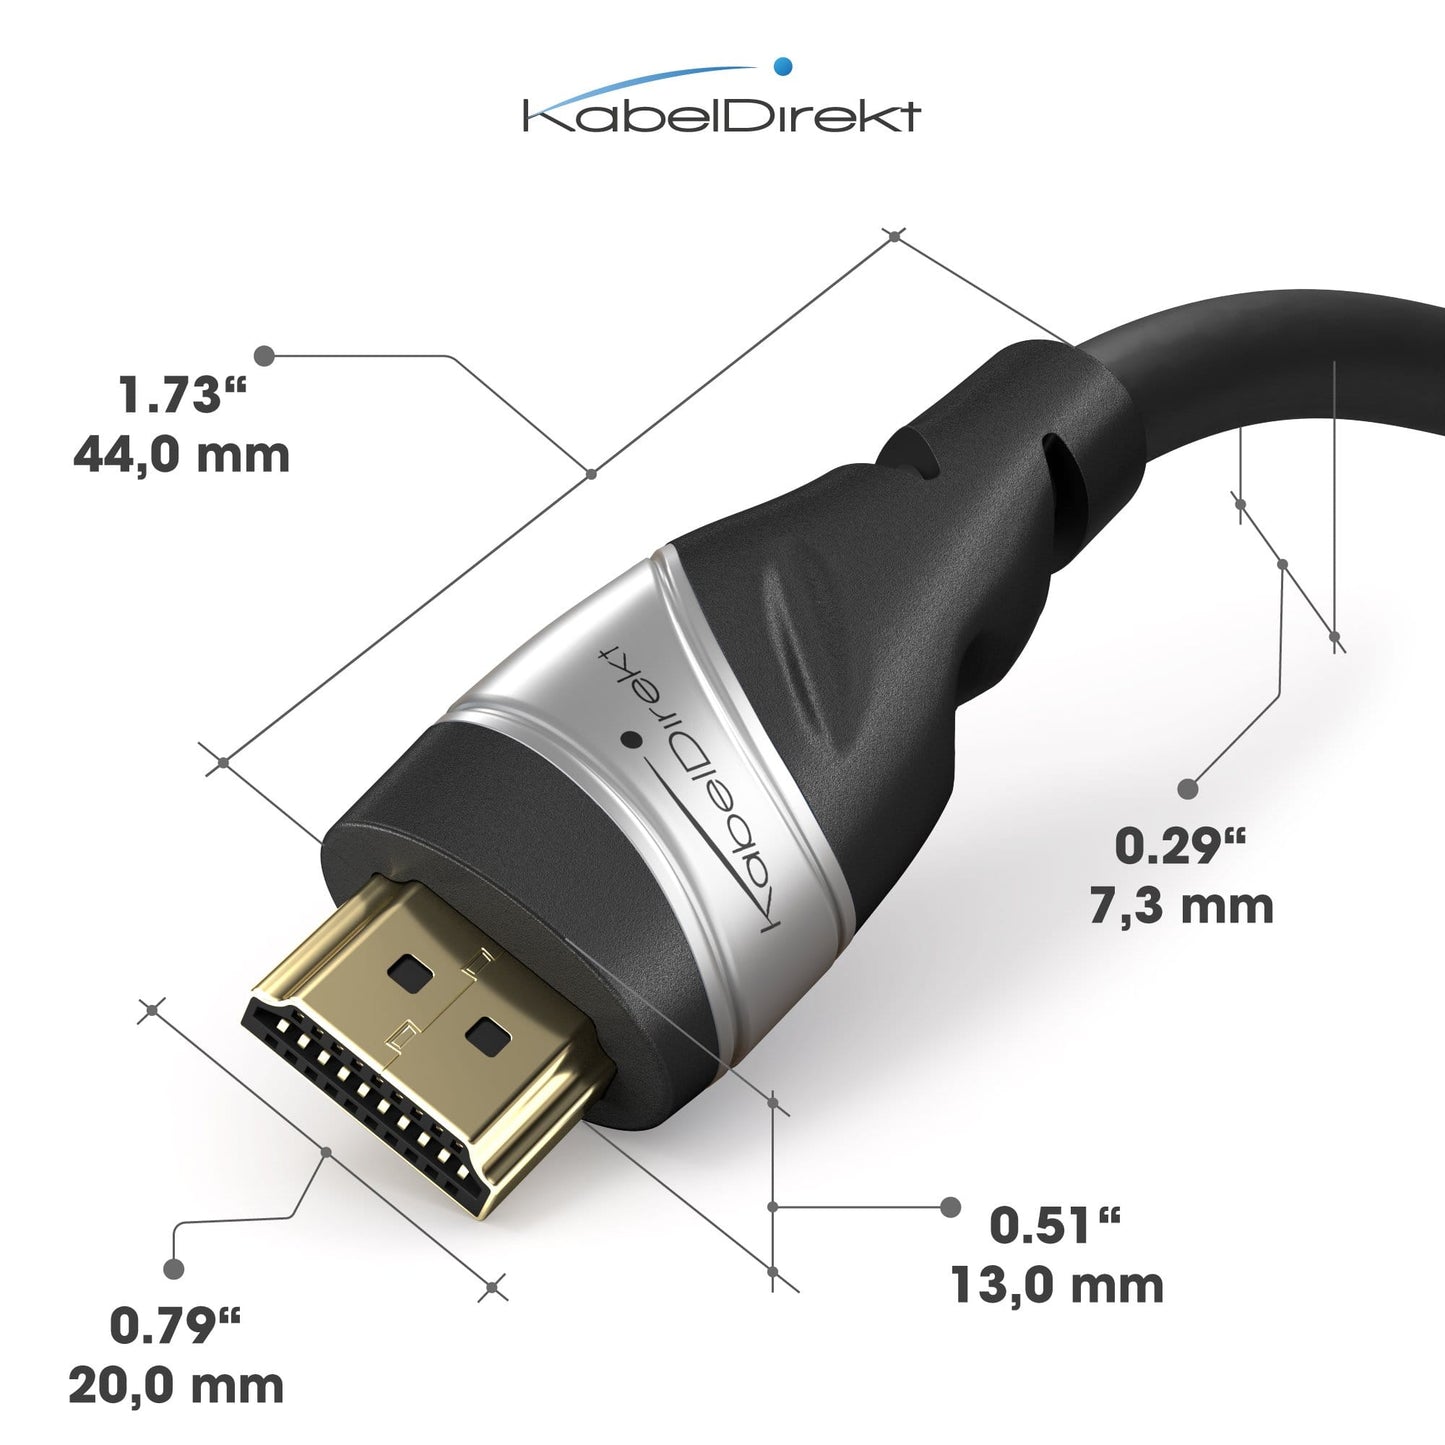 8K Ultra High Speed ​​HDMI 2.1 Cable - 48G, 8K@60Hz, Officially Tested and Licensed, Silver